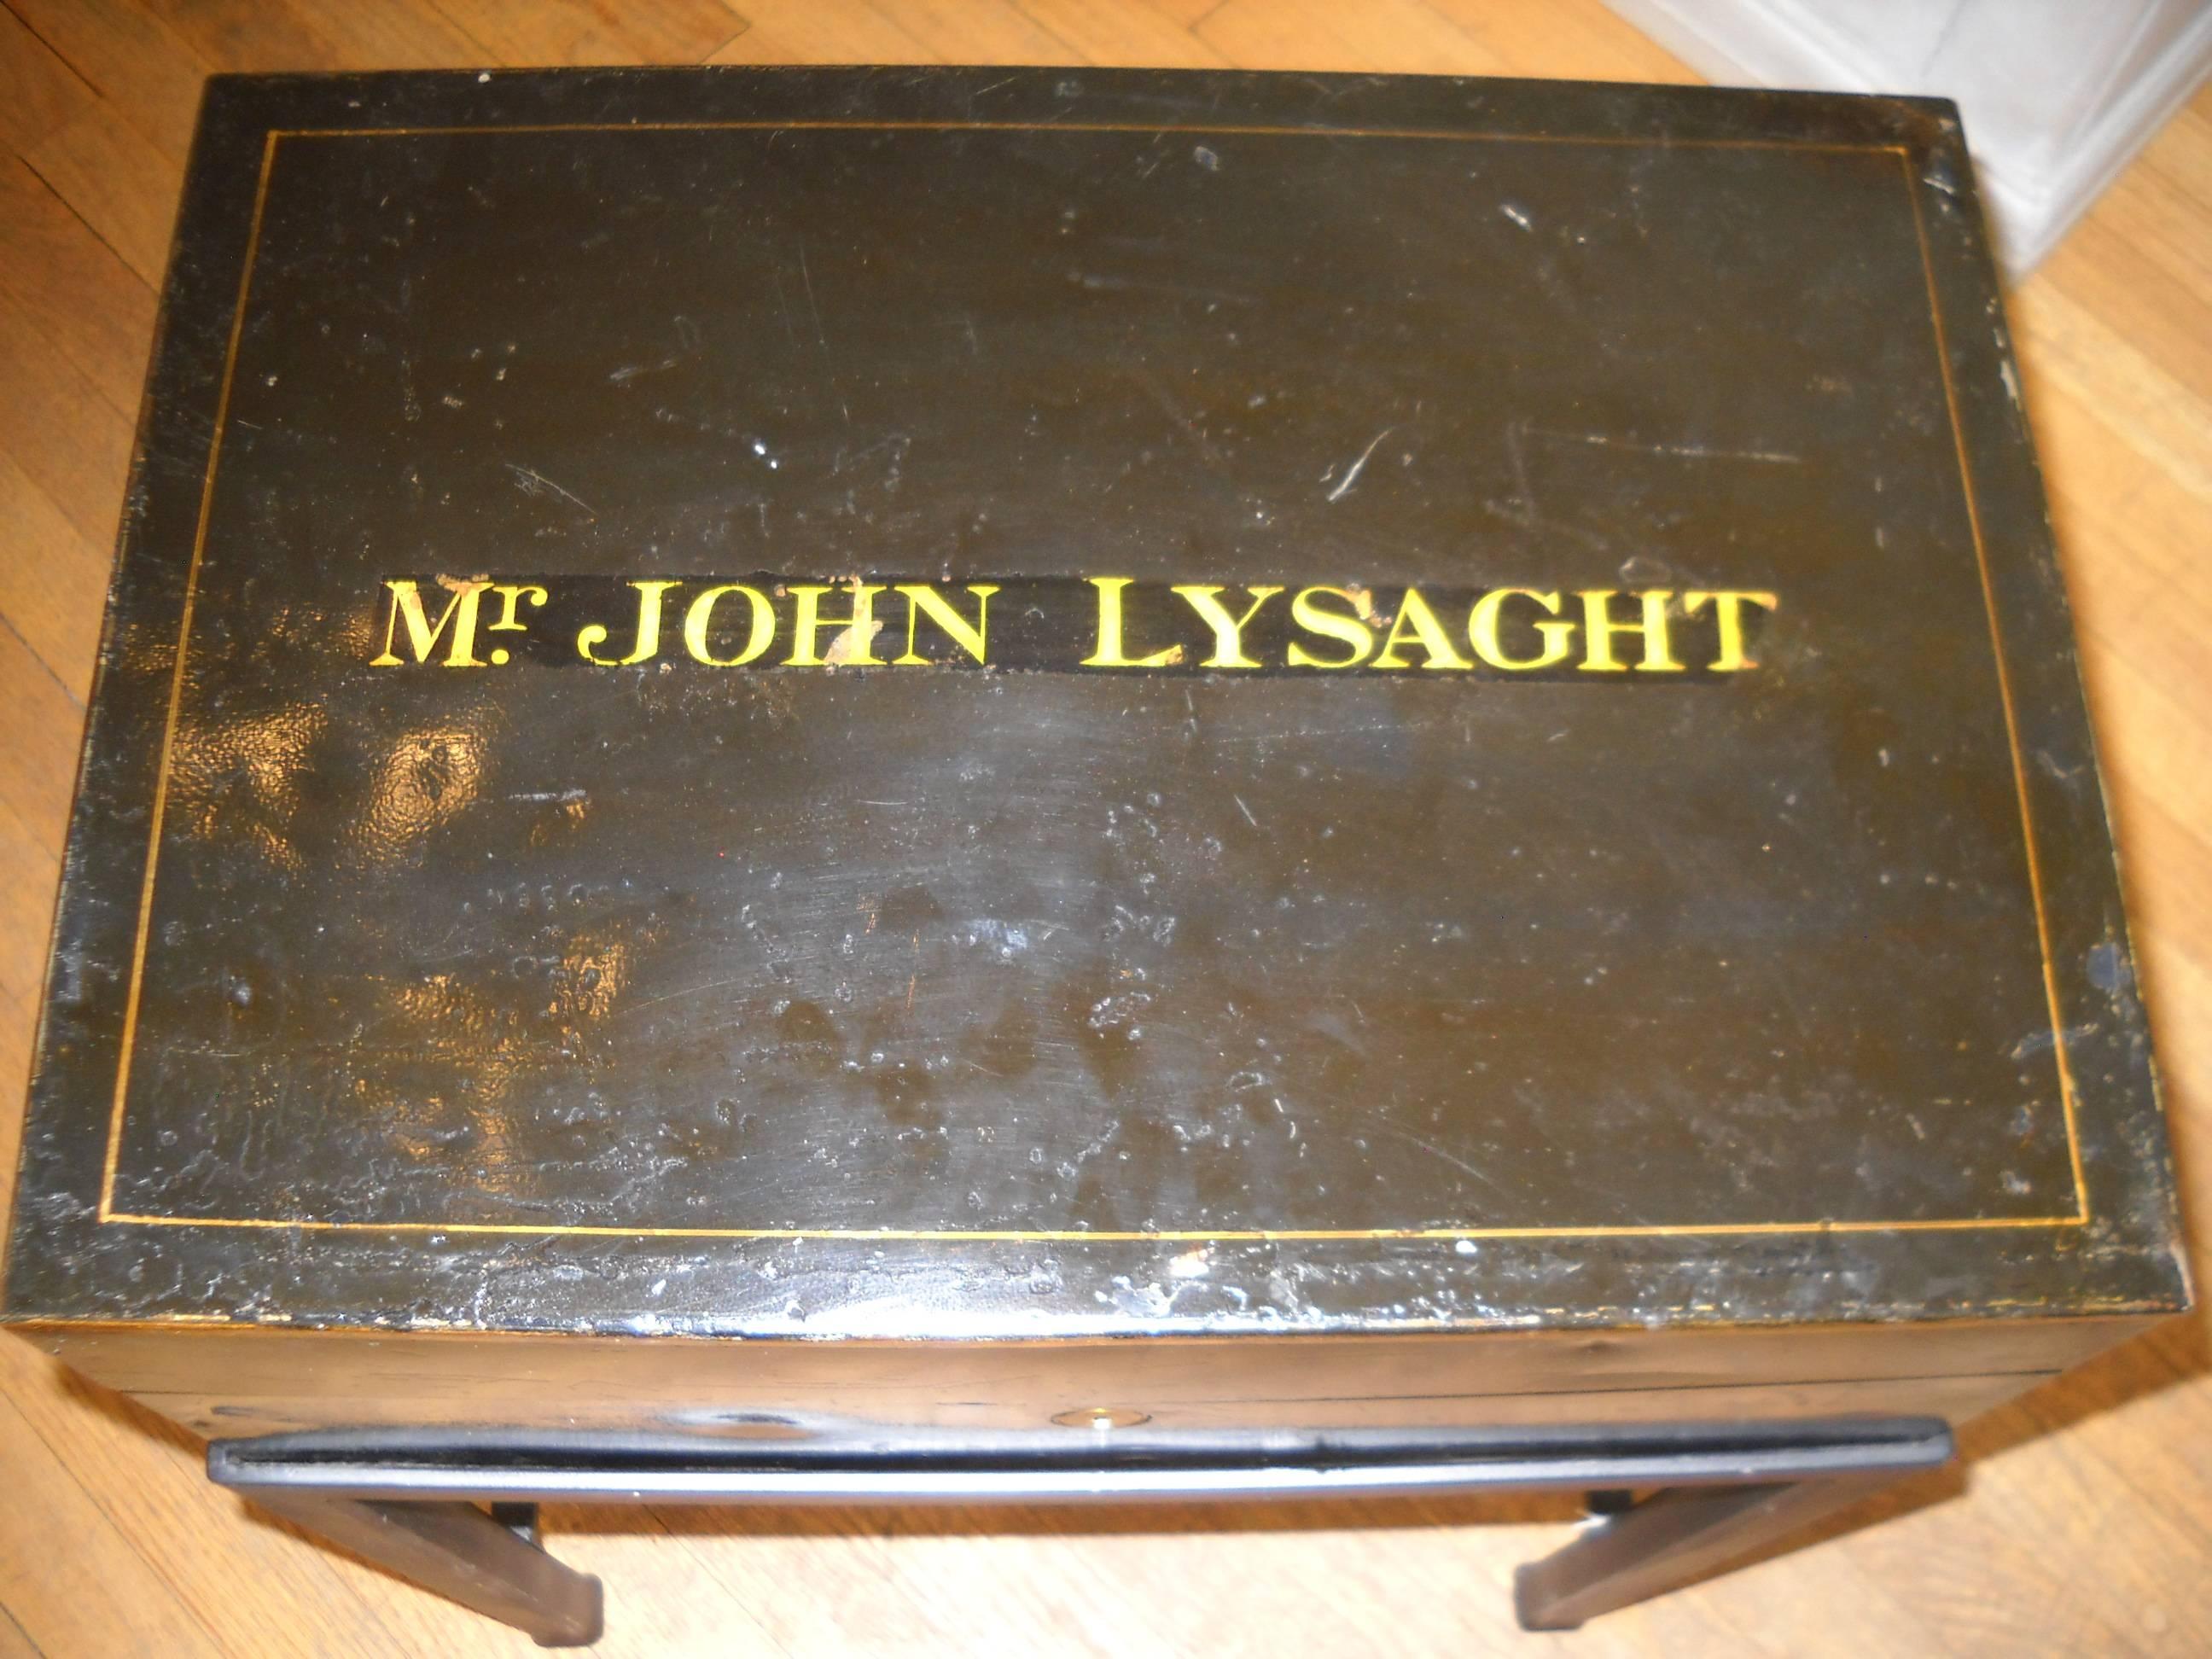 This English Deed box came from a law office in the UK and belonged to the gentlemen whose name is on the top of the box. Feel free to google him as he was a significant businessman in the UK . We thought this unique piece would be a lovely end